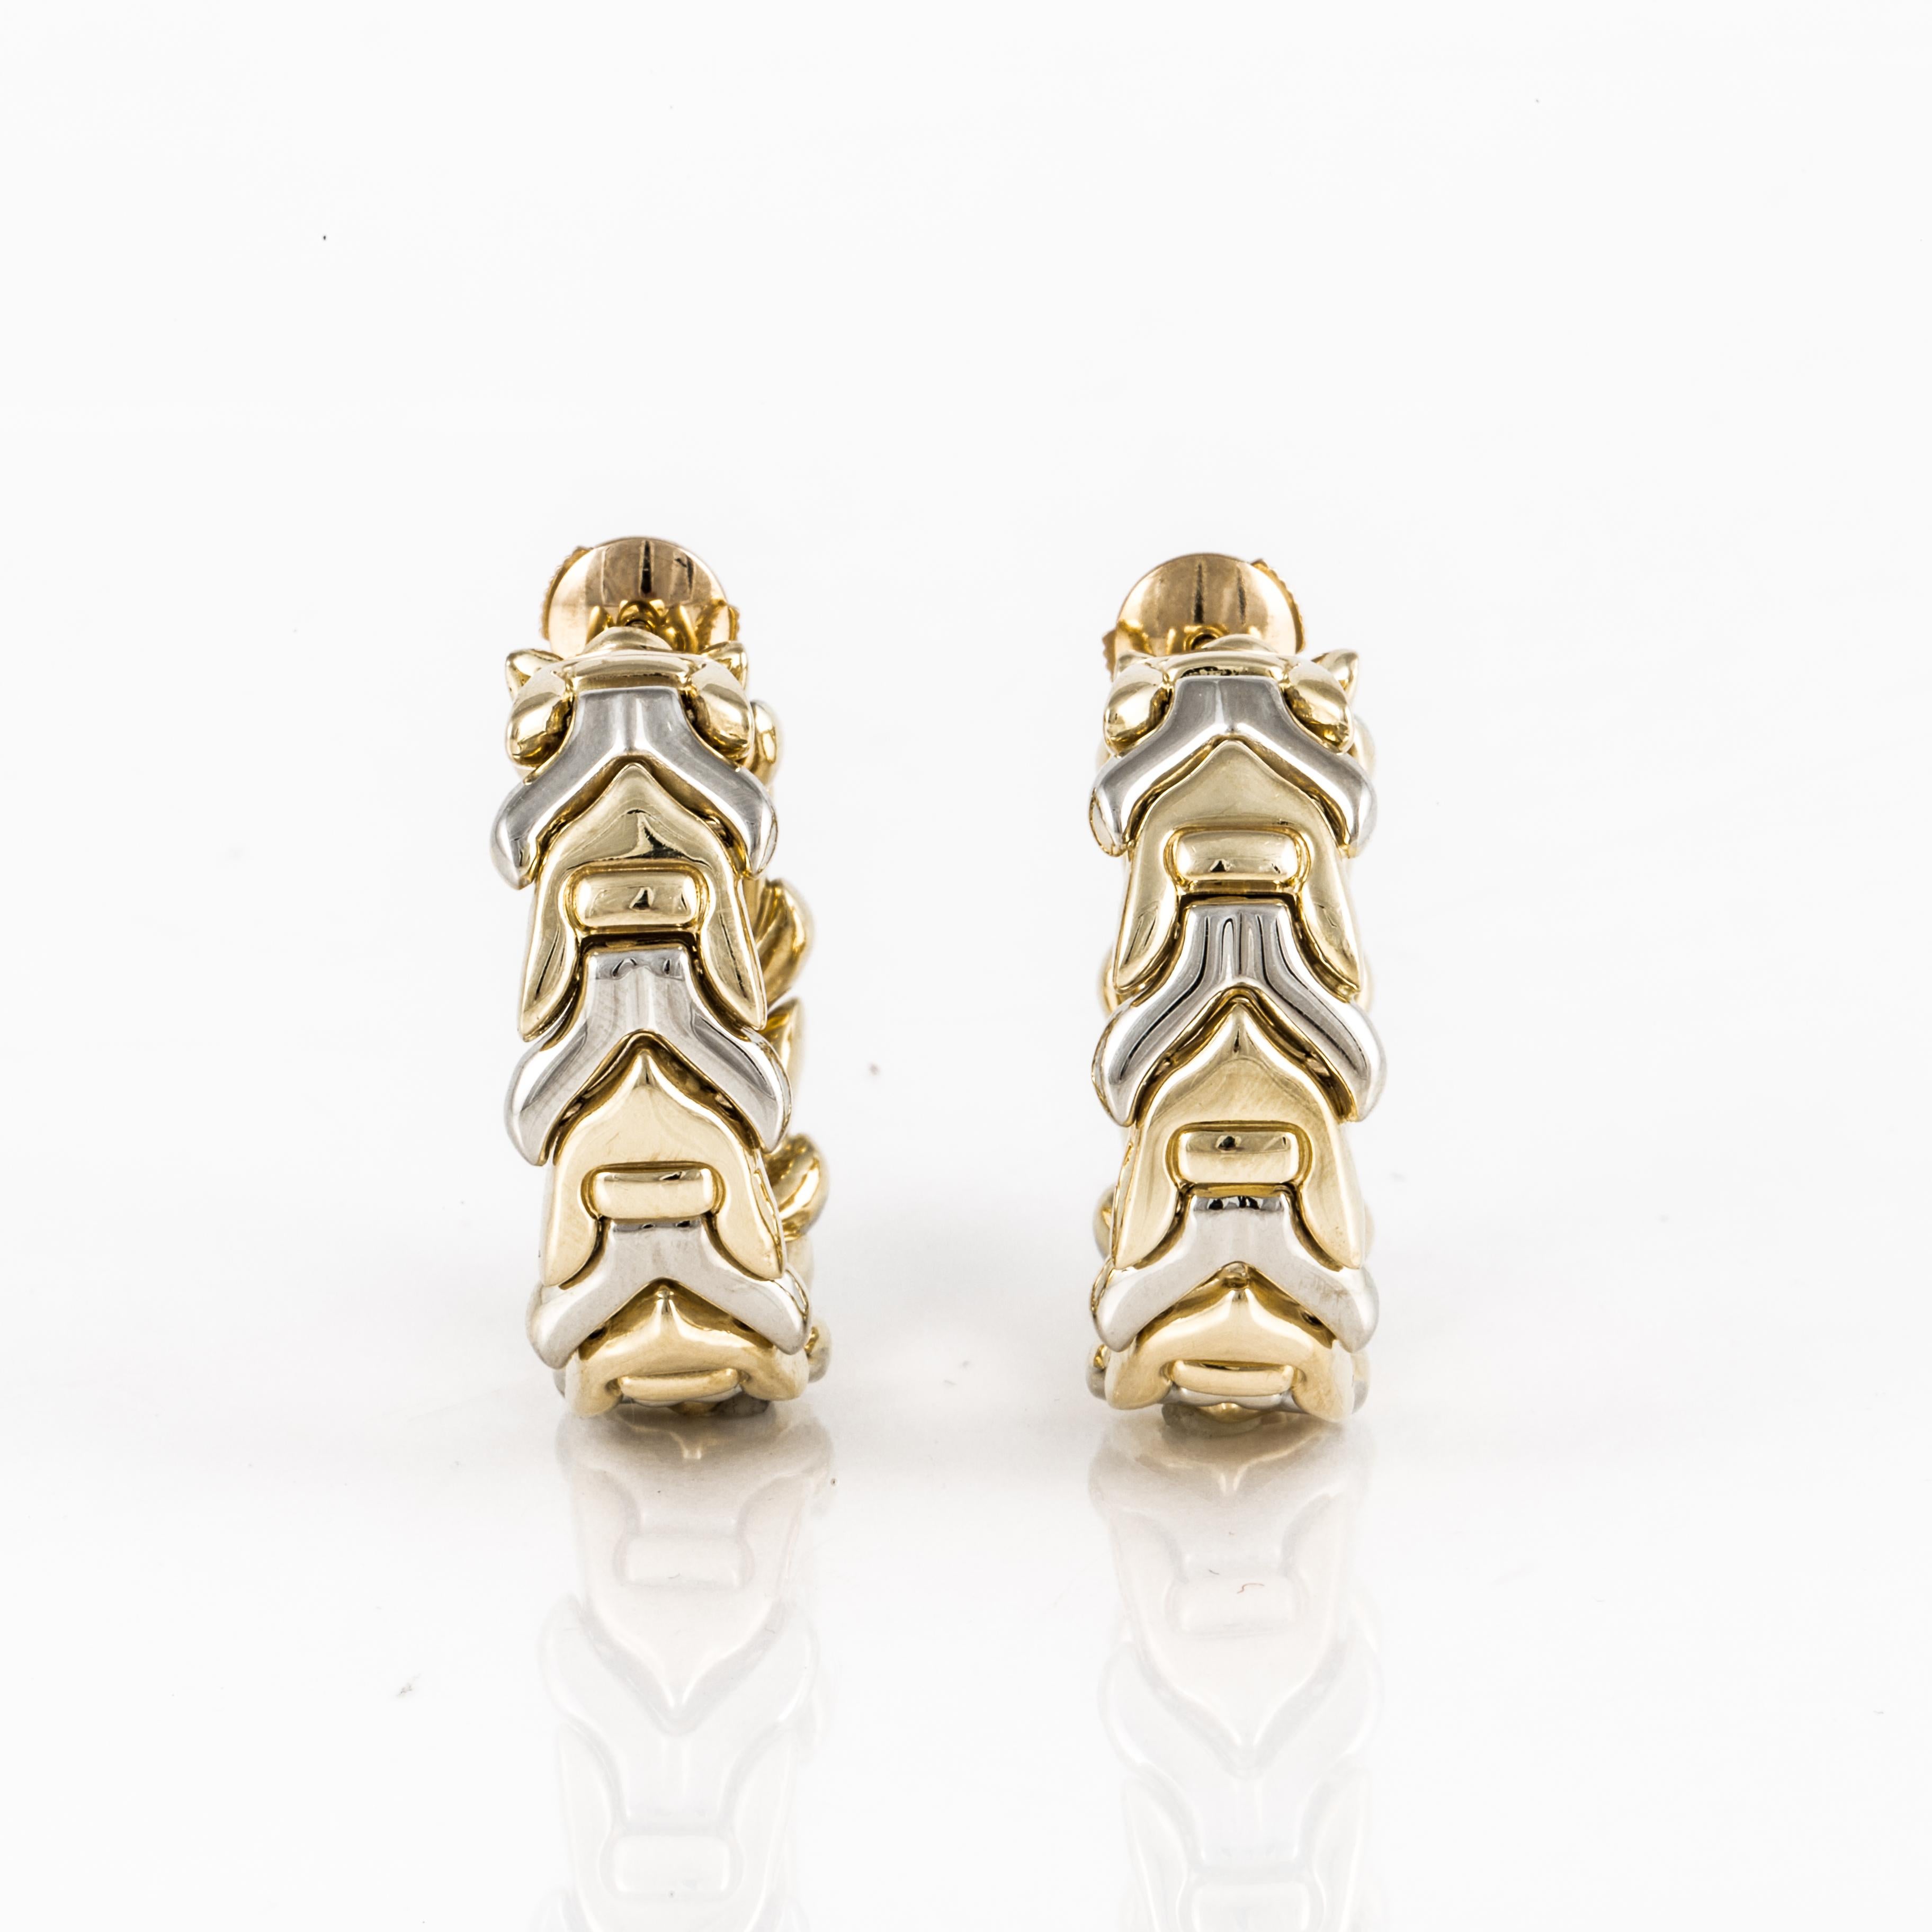 Chimento hoop style earrings in 18K white and yellow gold with a chevron pattern. They measure 1 1/16 inches long and 7/16 inches wide.  The closing mechanism is very secure with a post going through the backside of the earring and then a clutch.